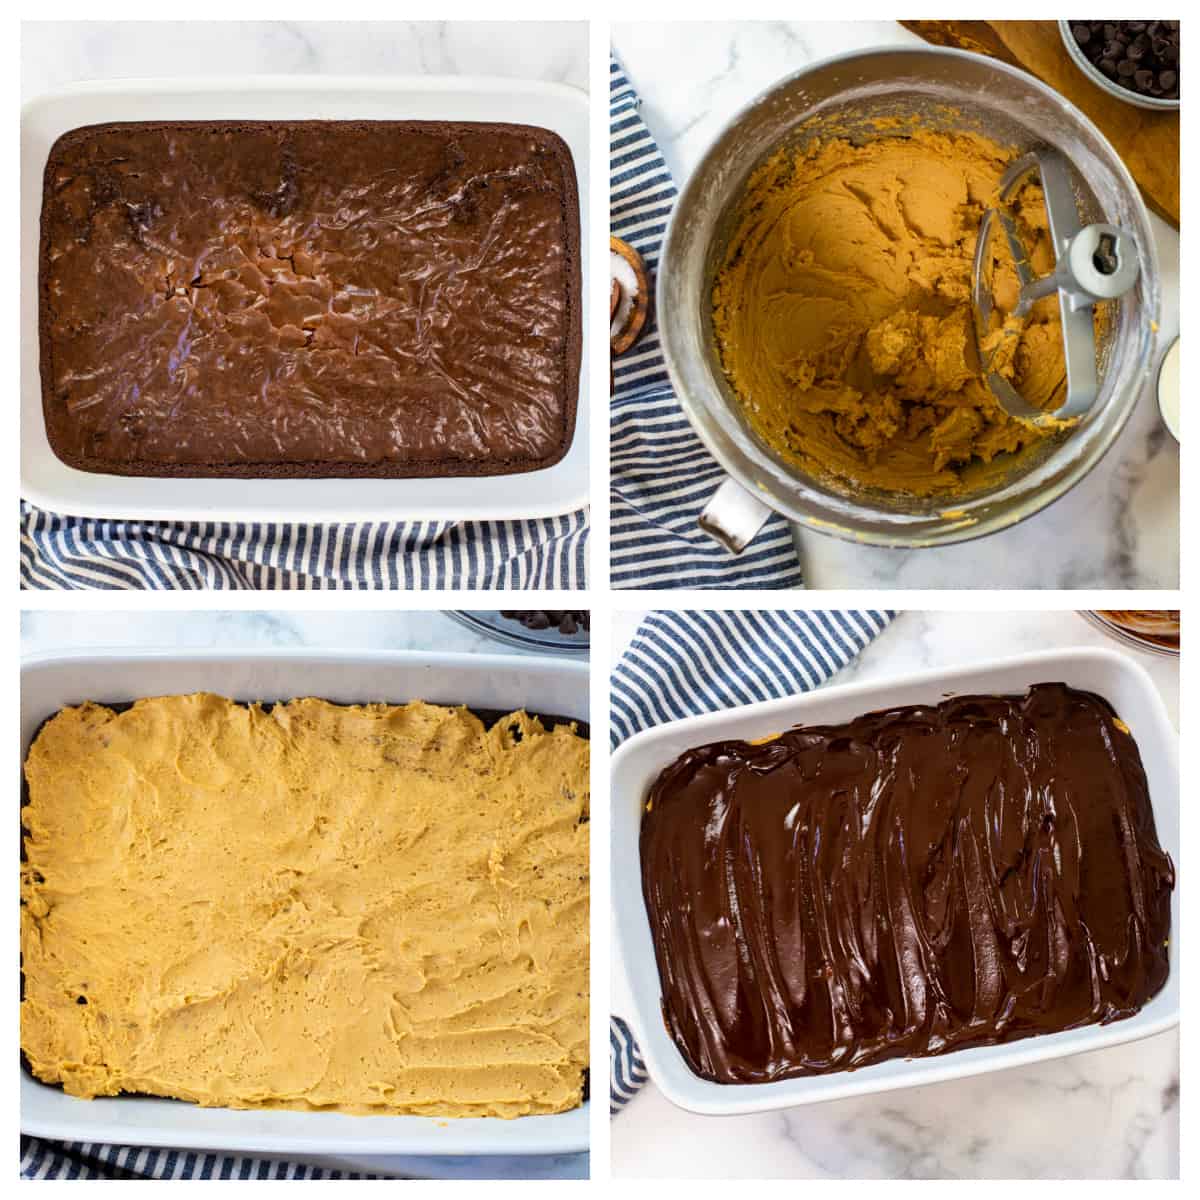 Collage showing how to make buckeye brownie recipe.